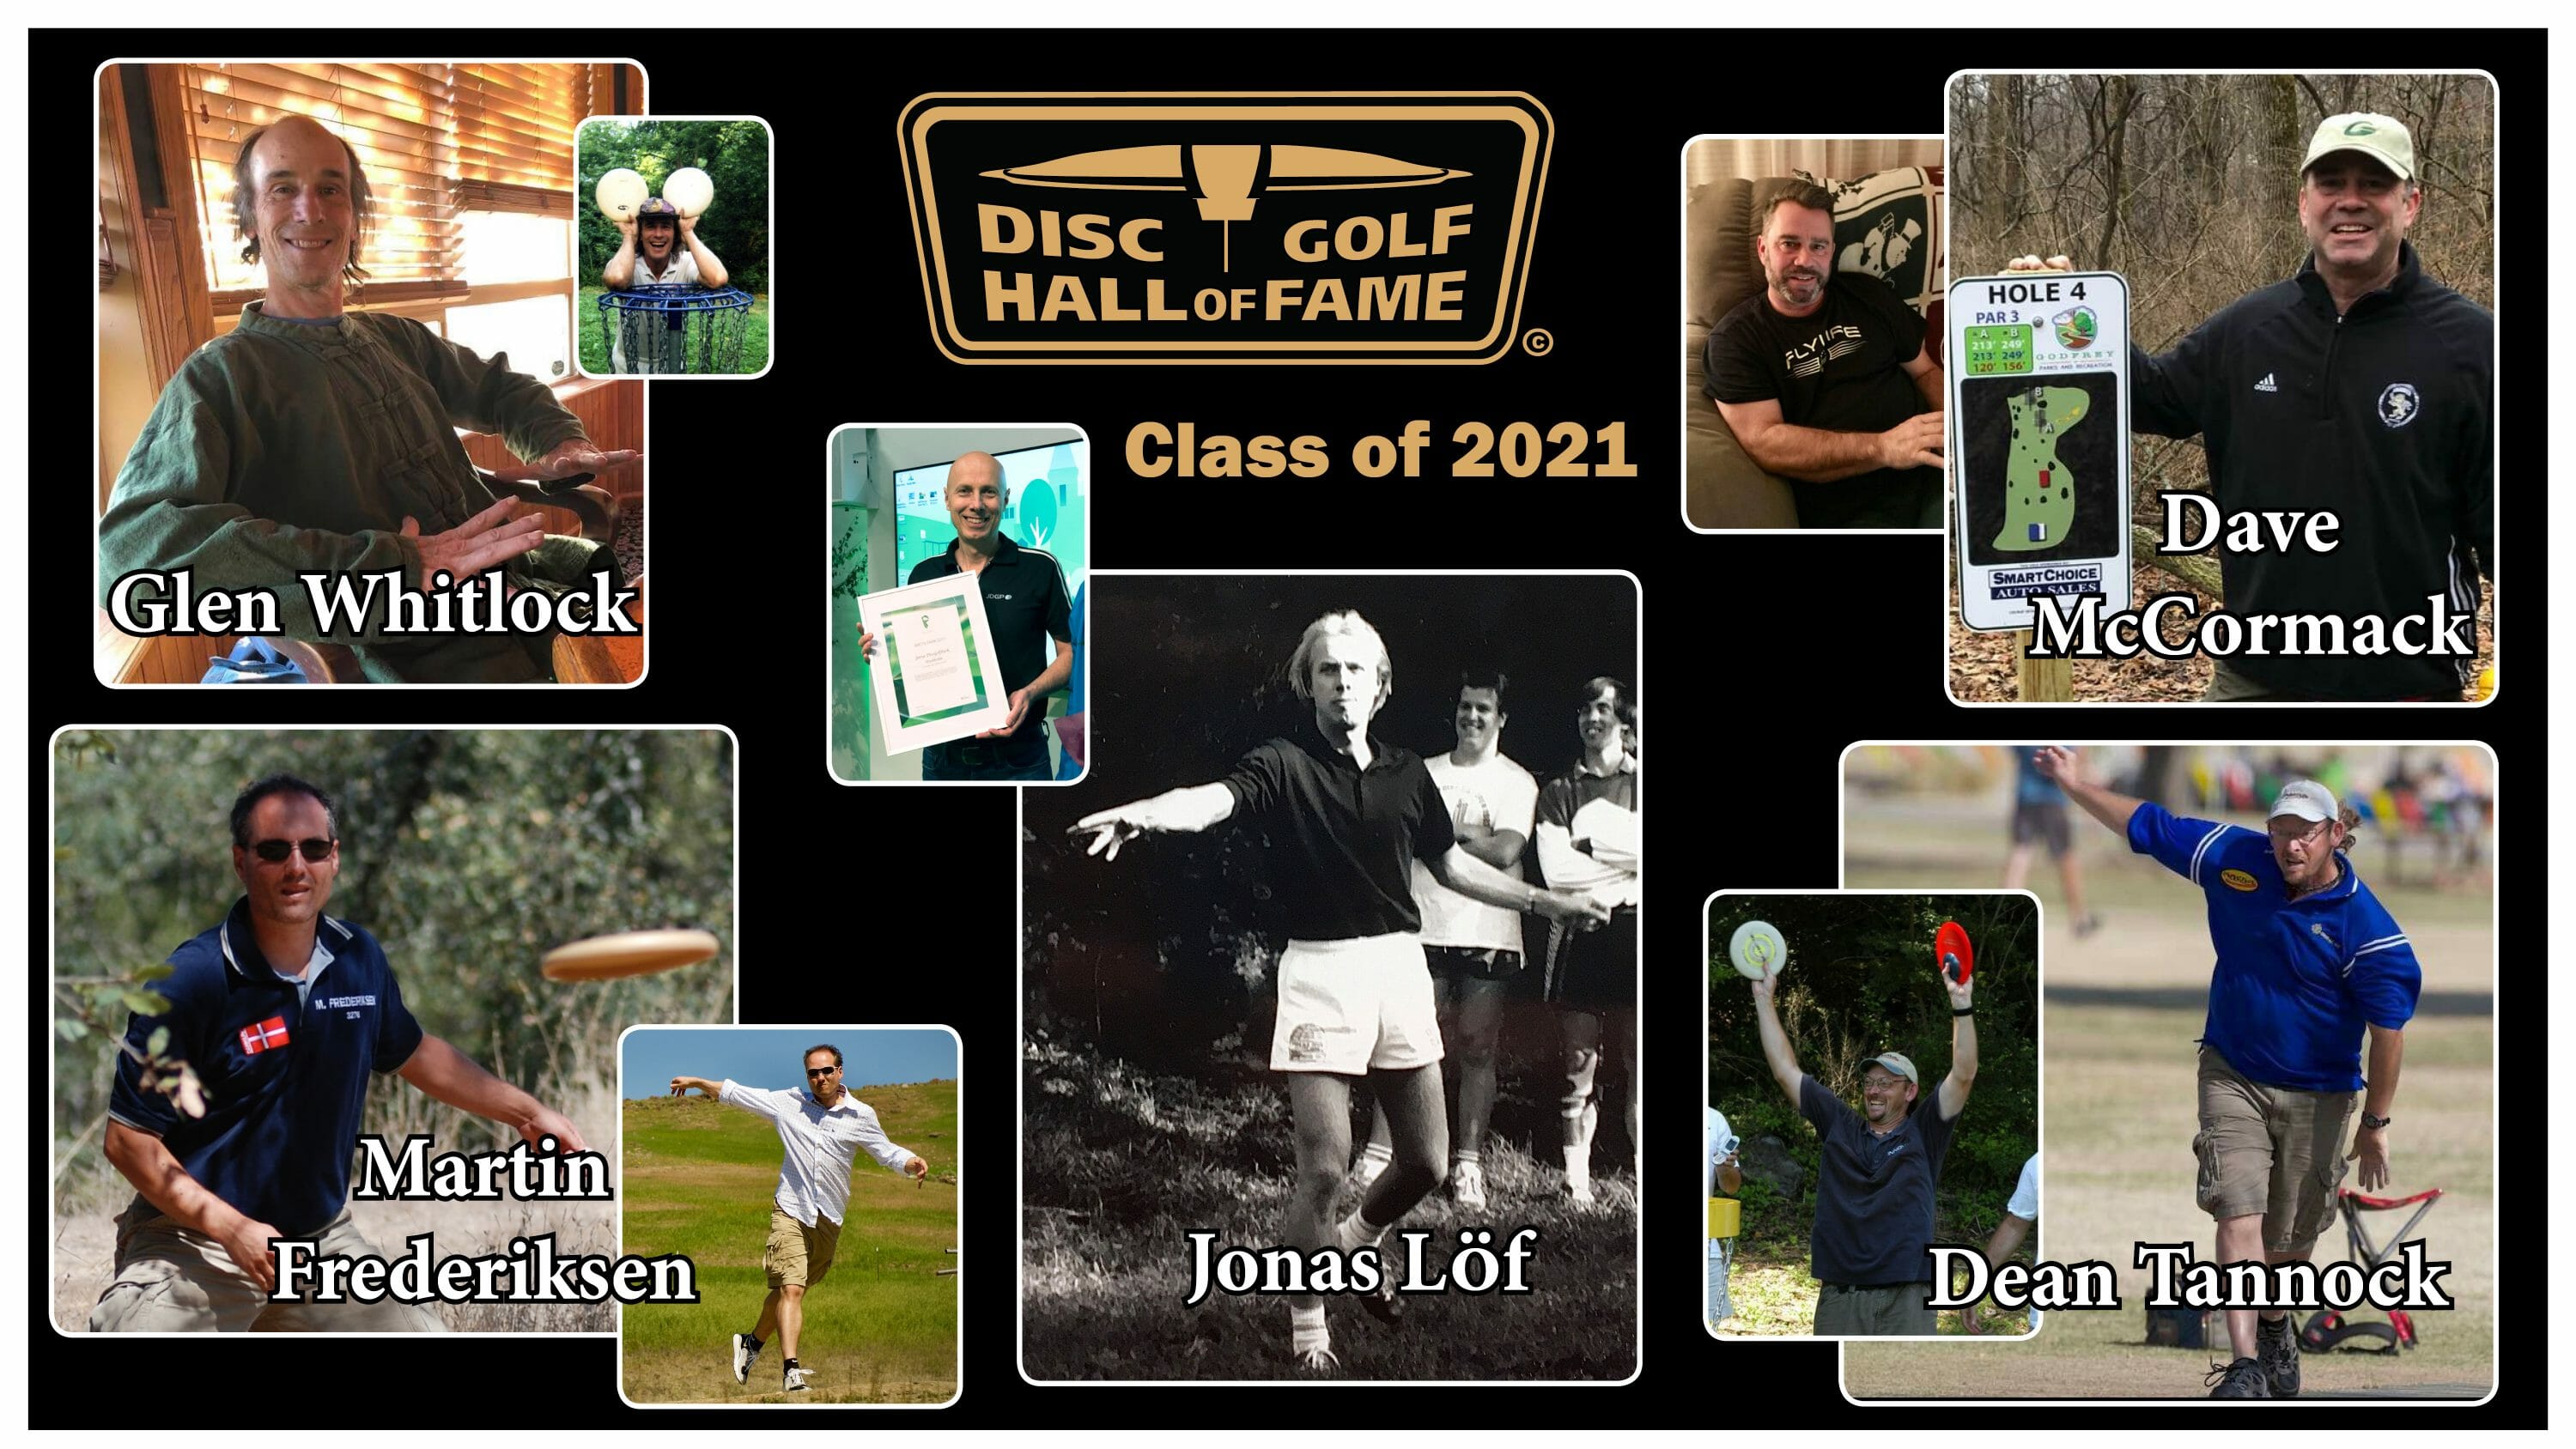 Amidst McBeth Controversy, Changes Come to the Disc Golf Hall of Fame